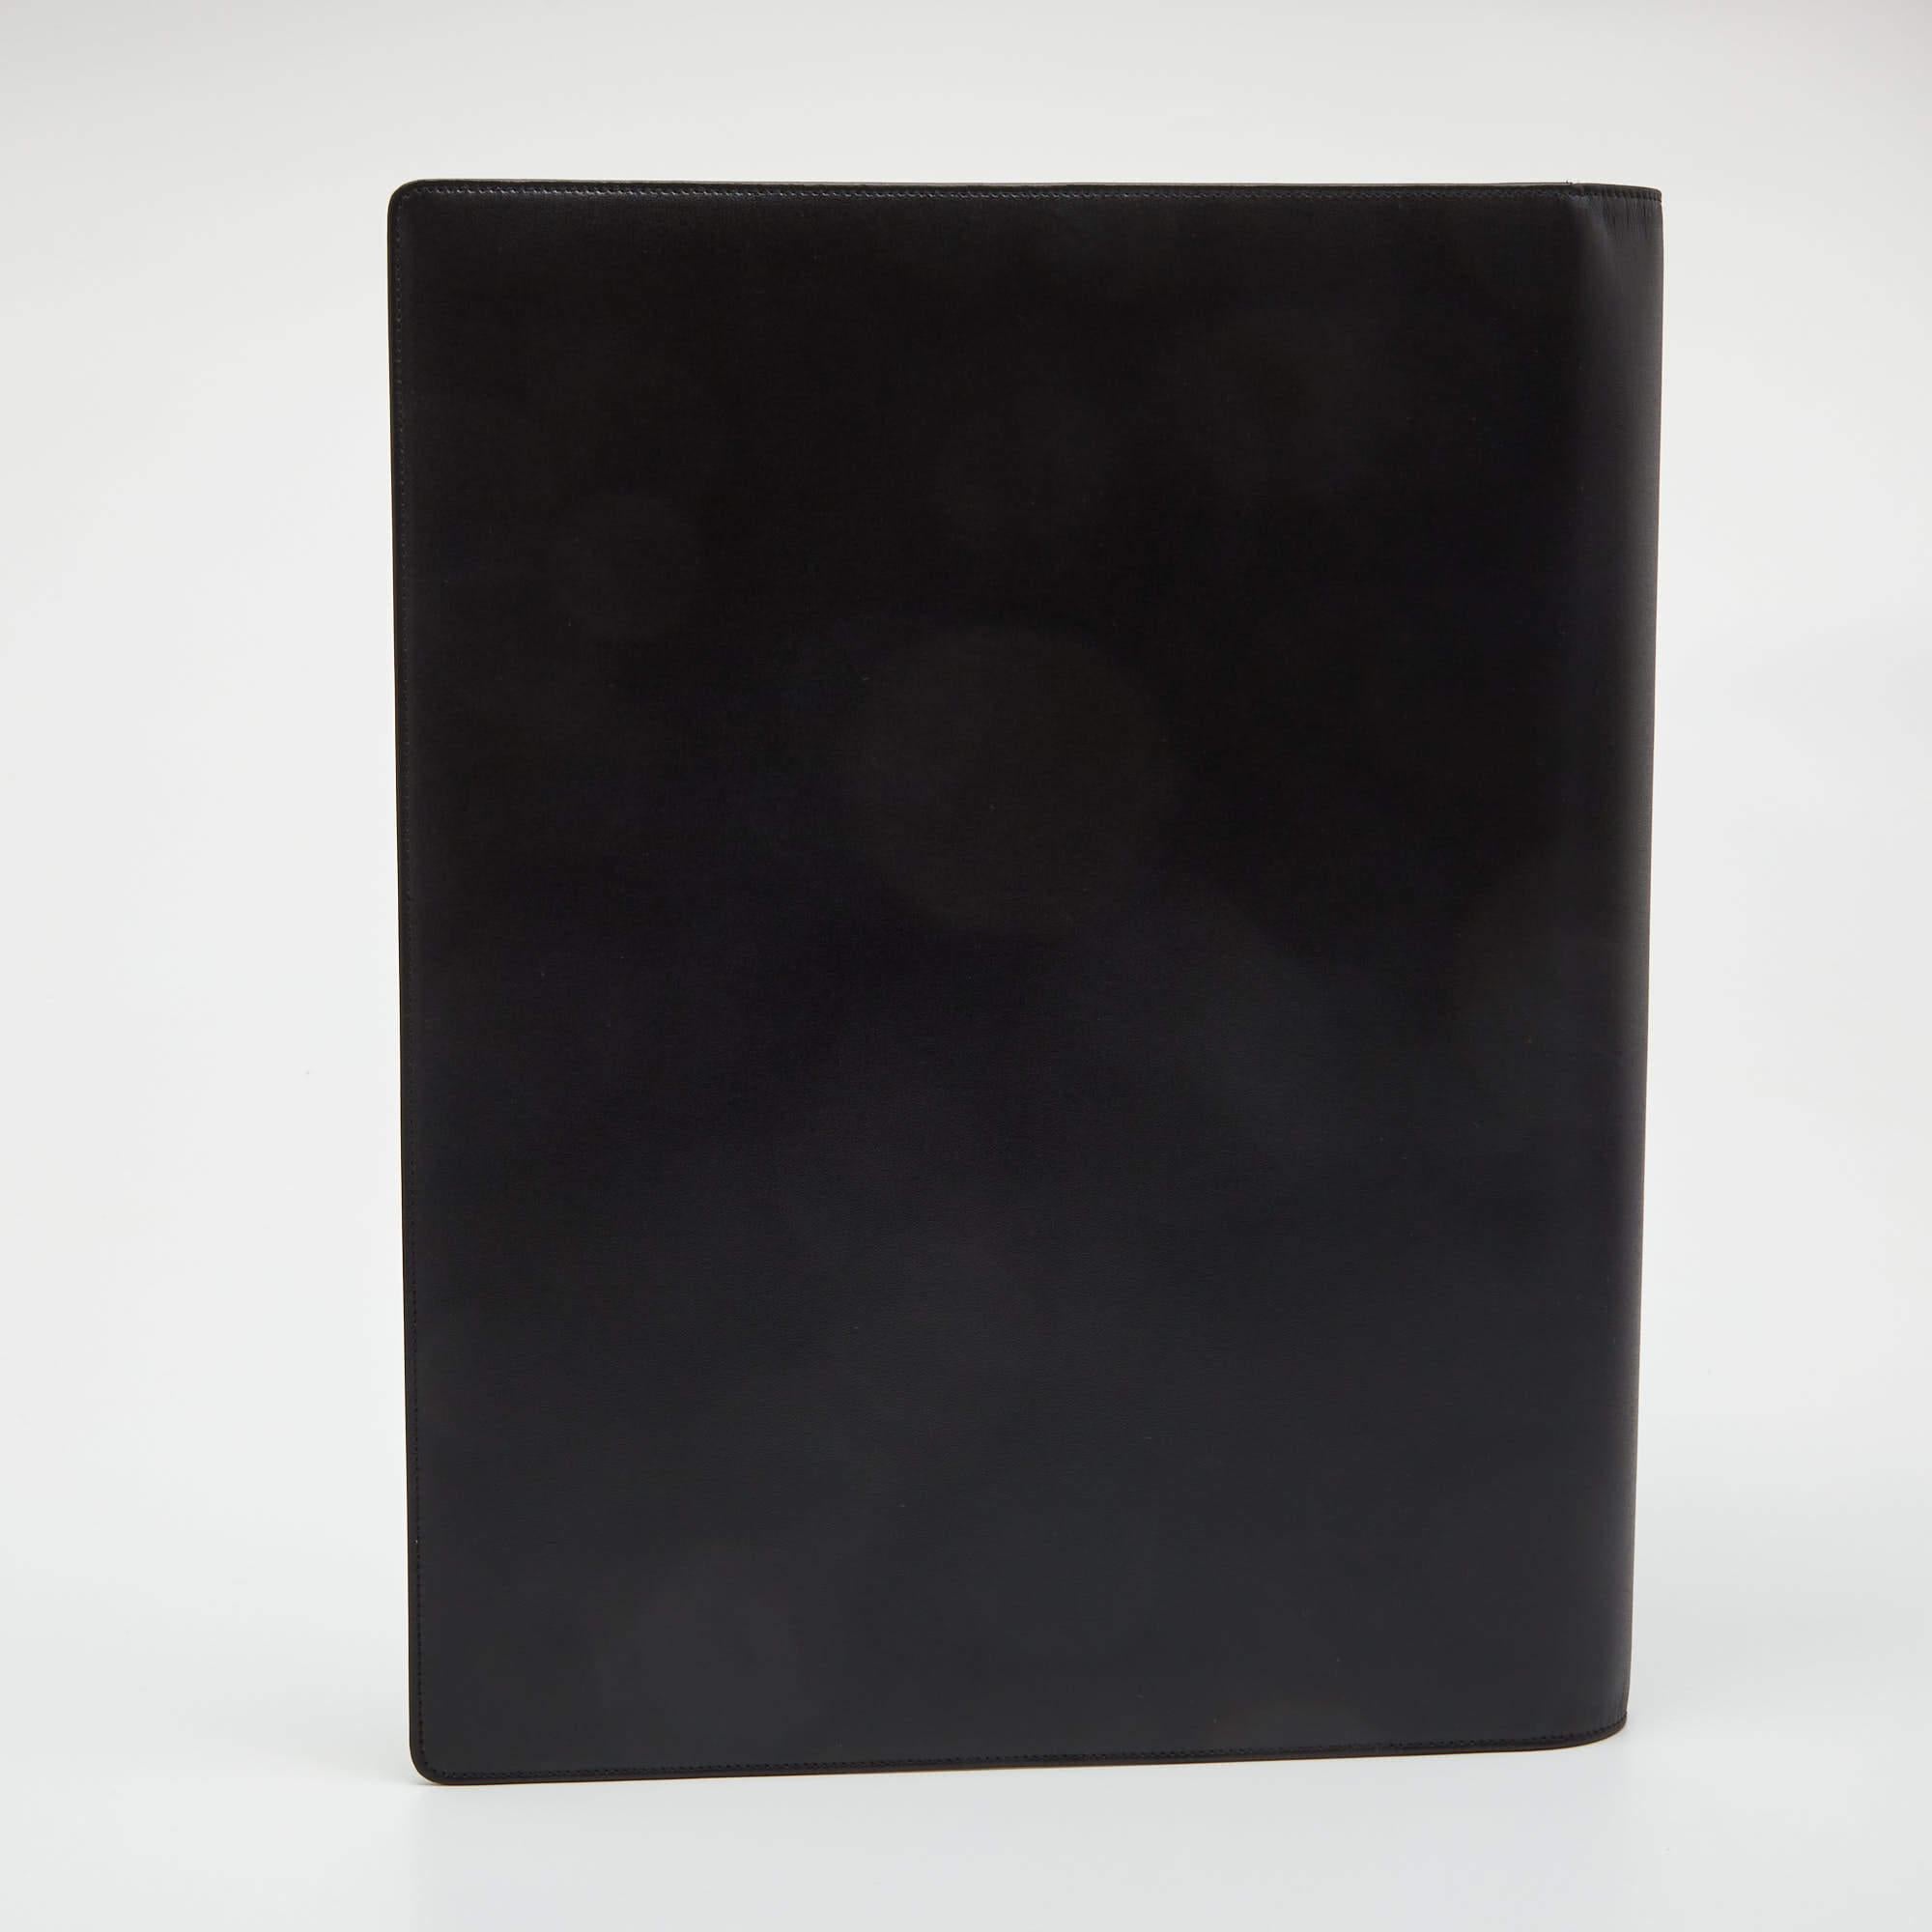 This practical and opulent conference folder will uphold all your professional details efficiently. Crafted from black leather, it features papers inside and the signature Montblanc star on the front.

Includes: Original Dustbag, Original Box, Paper